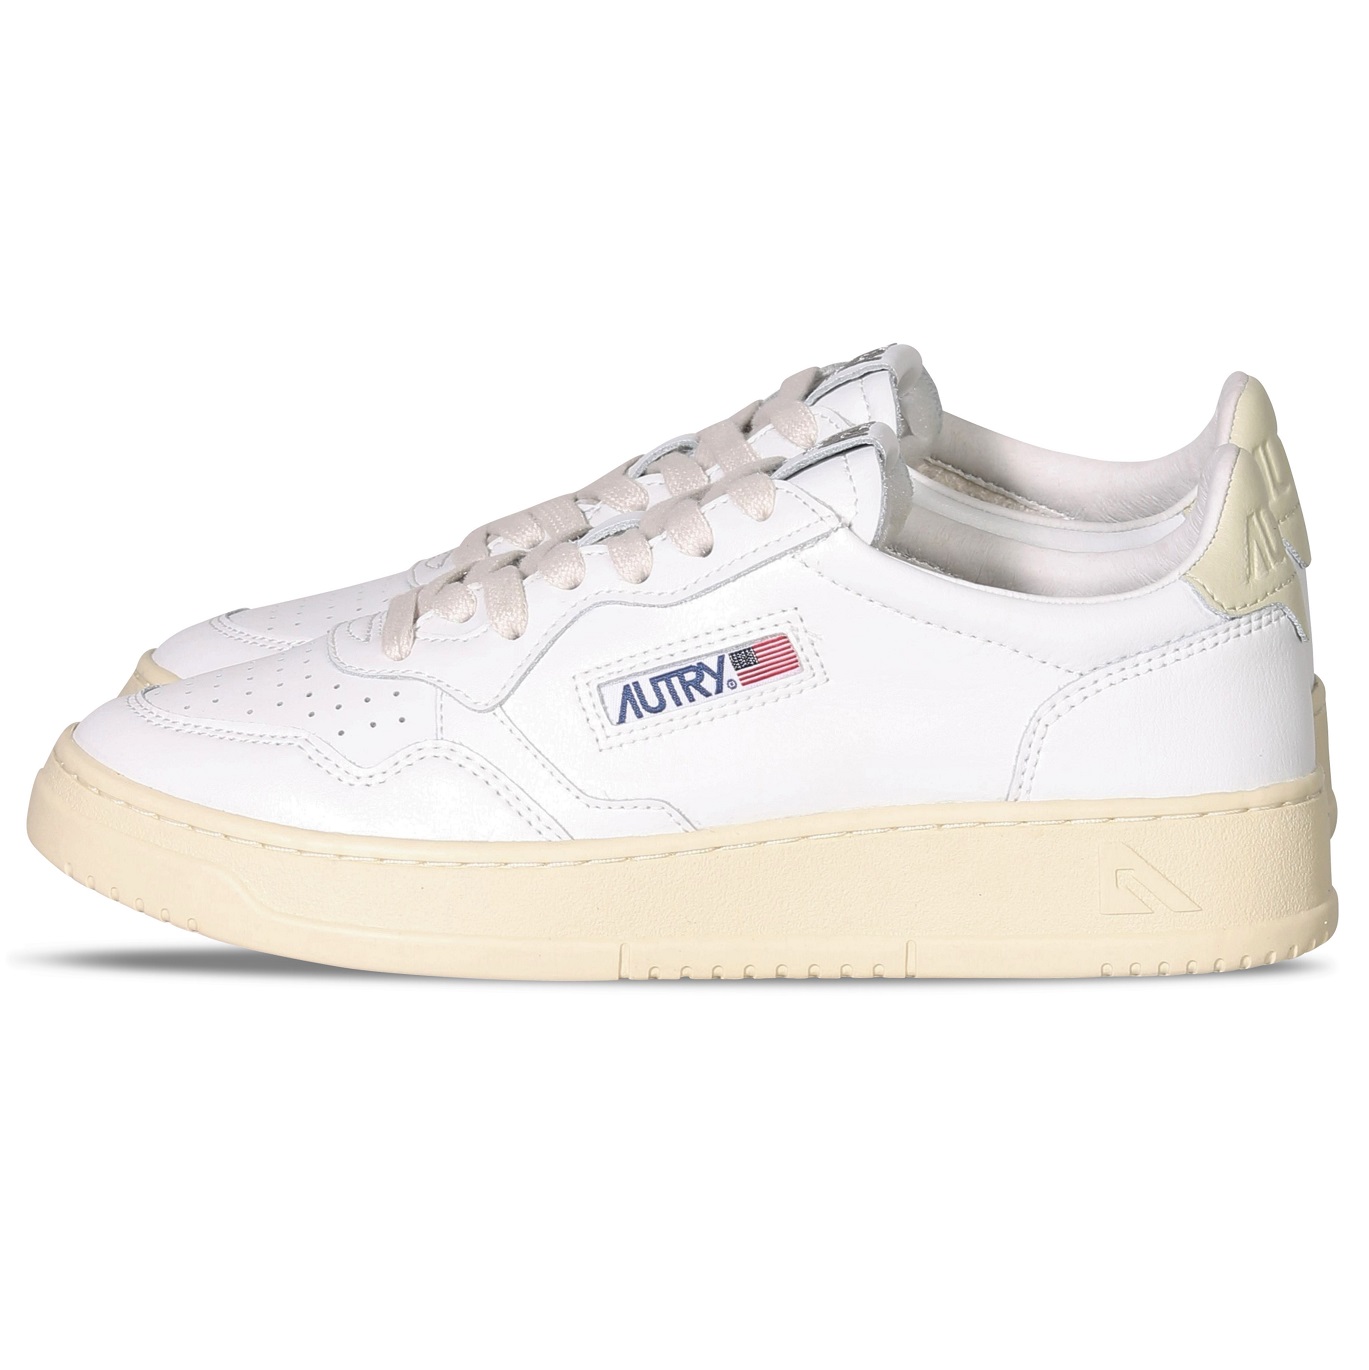 AUTRY ACTION SHOES Sneaker Low in White/Beige